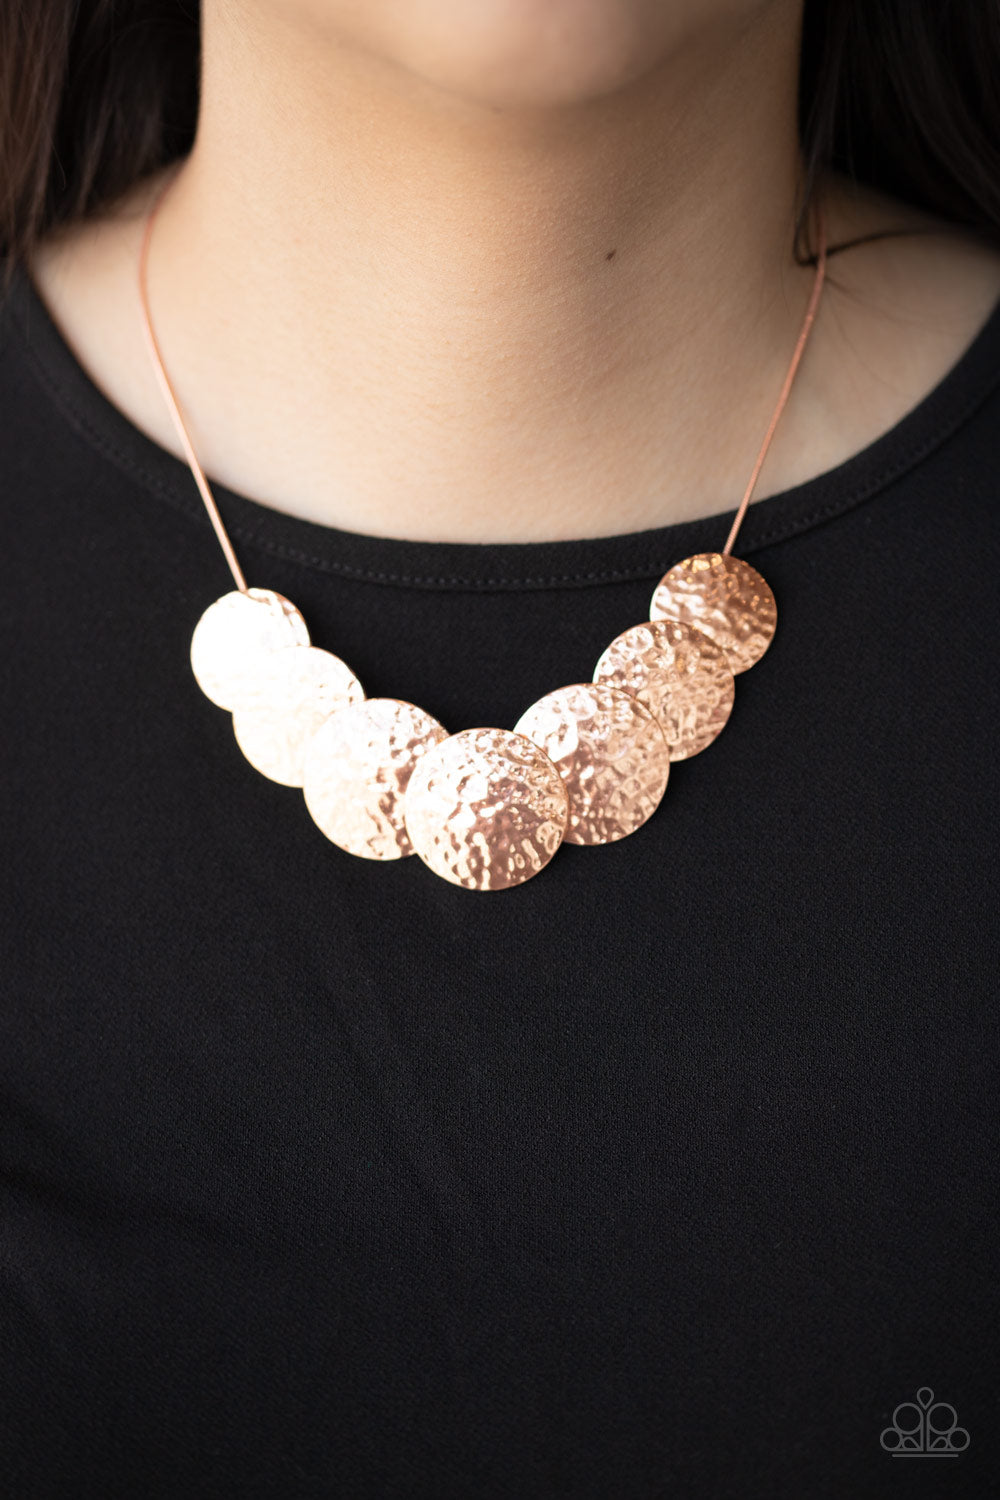 RADIAL Waves - Copper Necklace Paparazzi Accessories $5 Jewelry. Subscribe and Save!